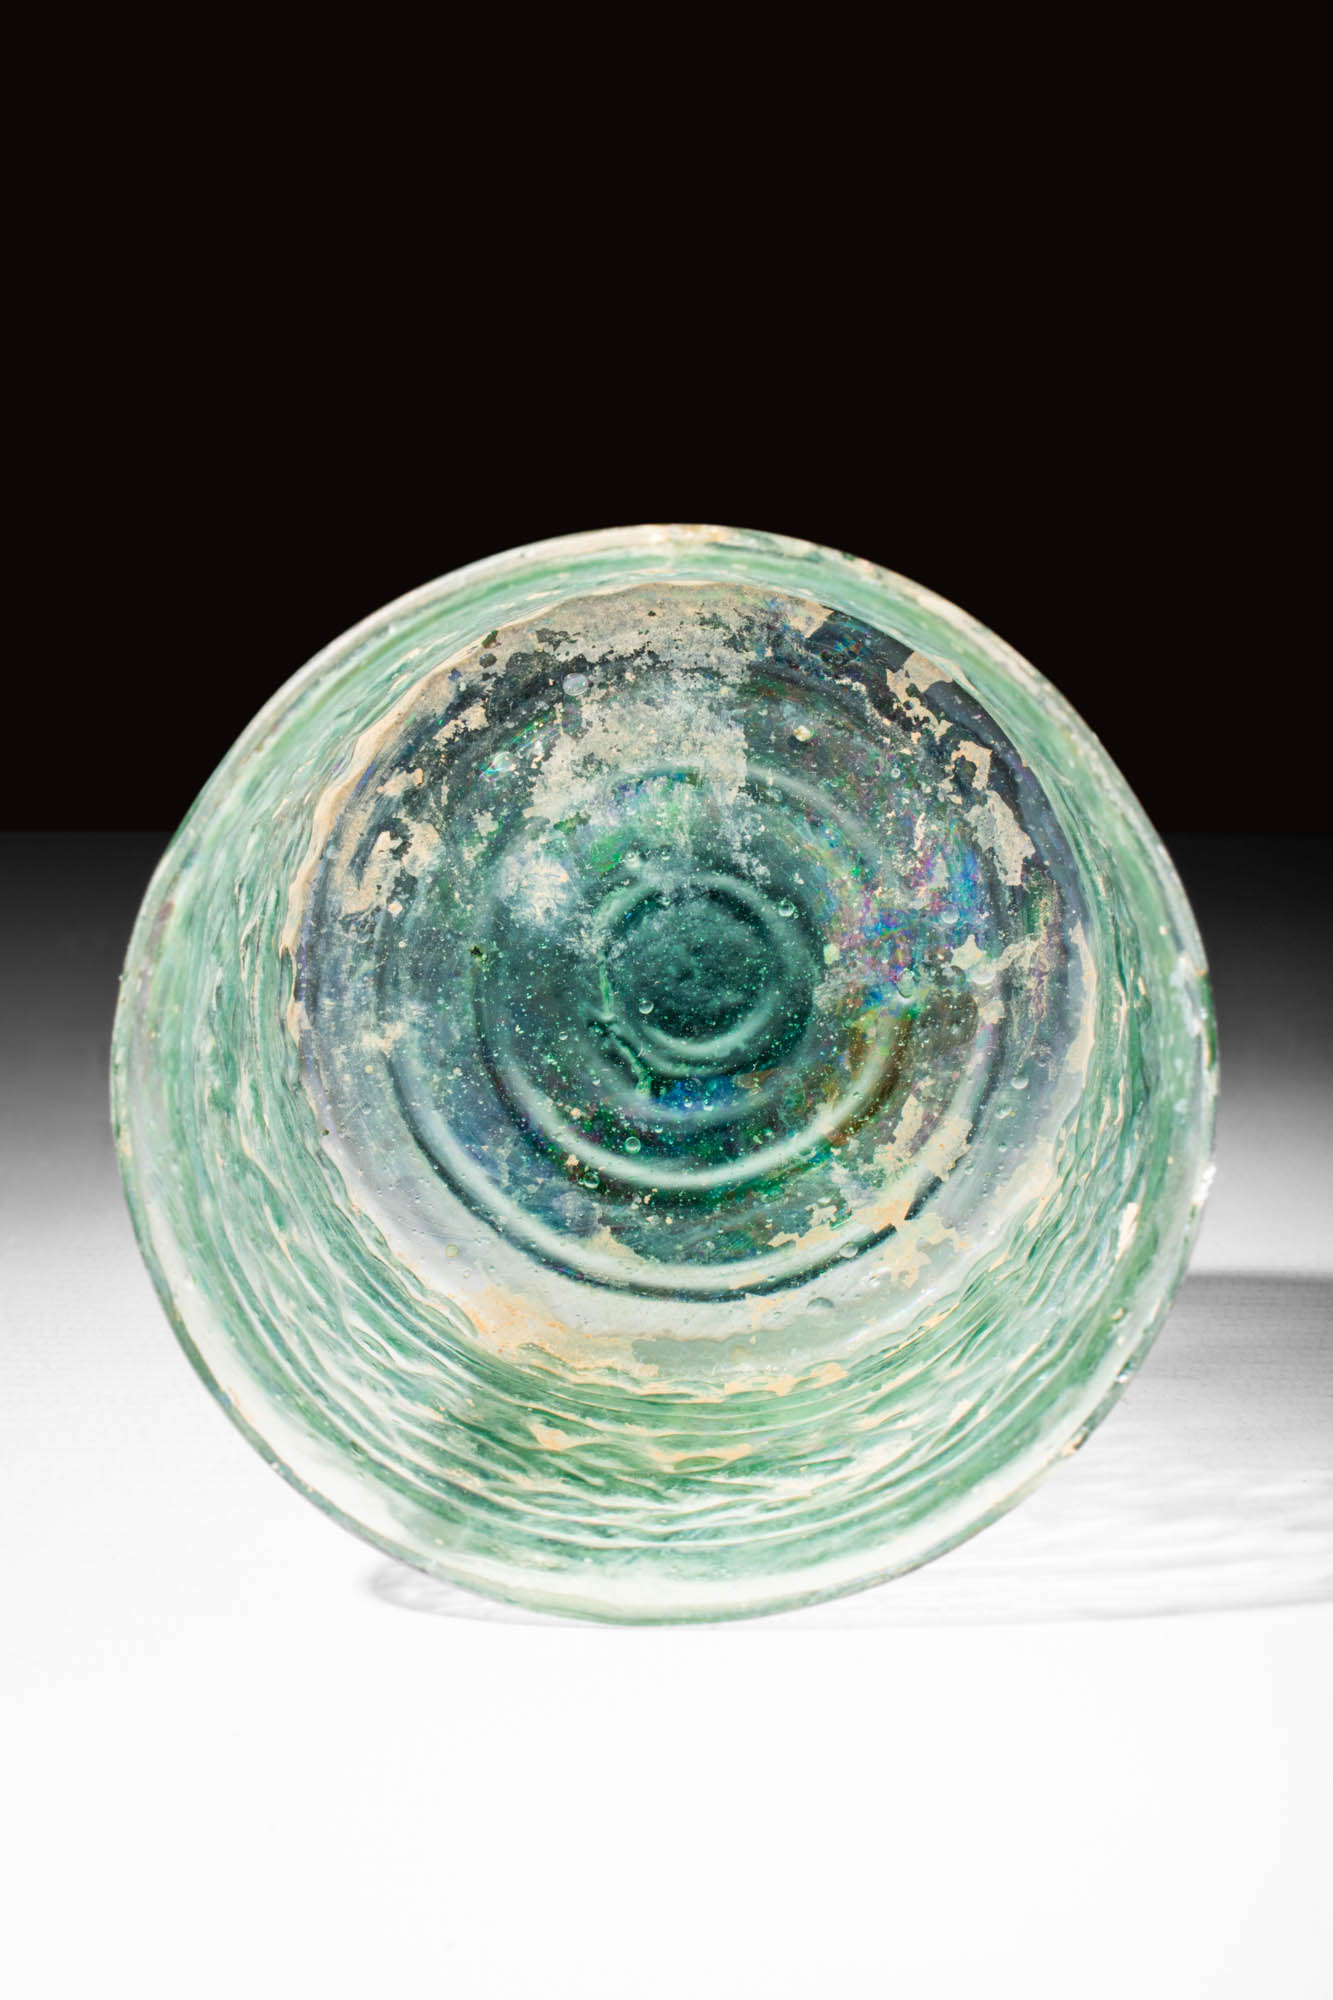 BYZANTINE GLASS CUP DECORATED WITH INSCRIPTION - Image 5 of 5